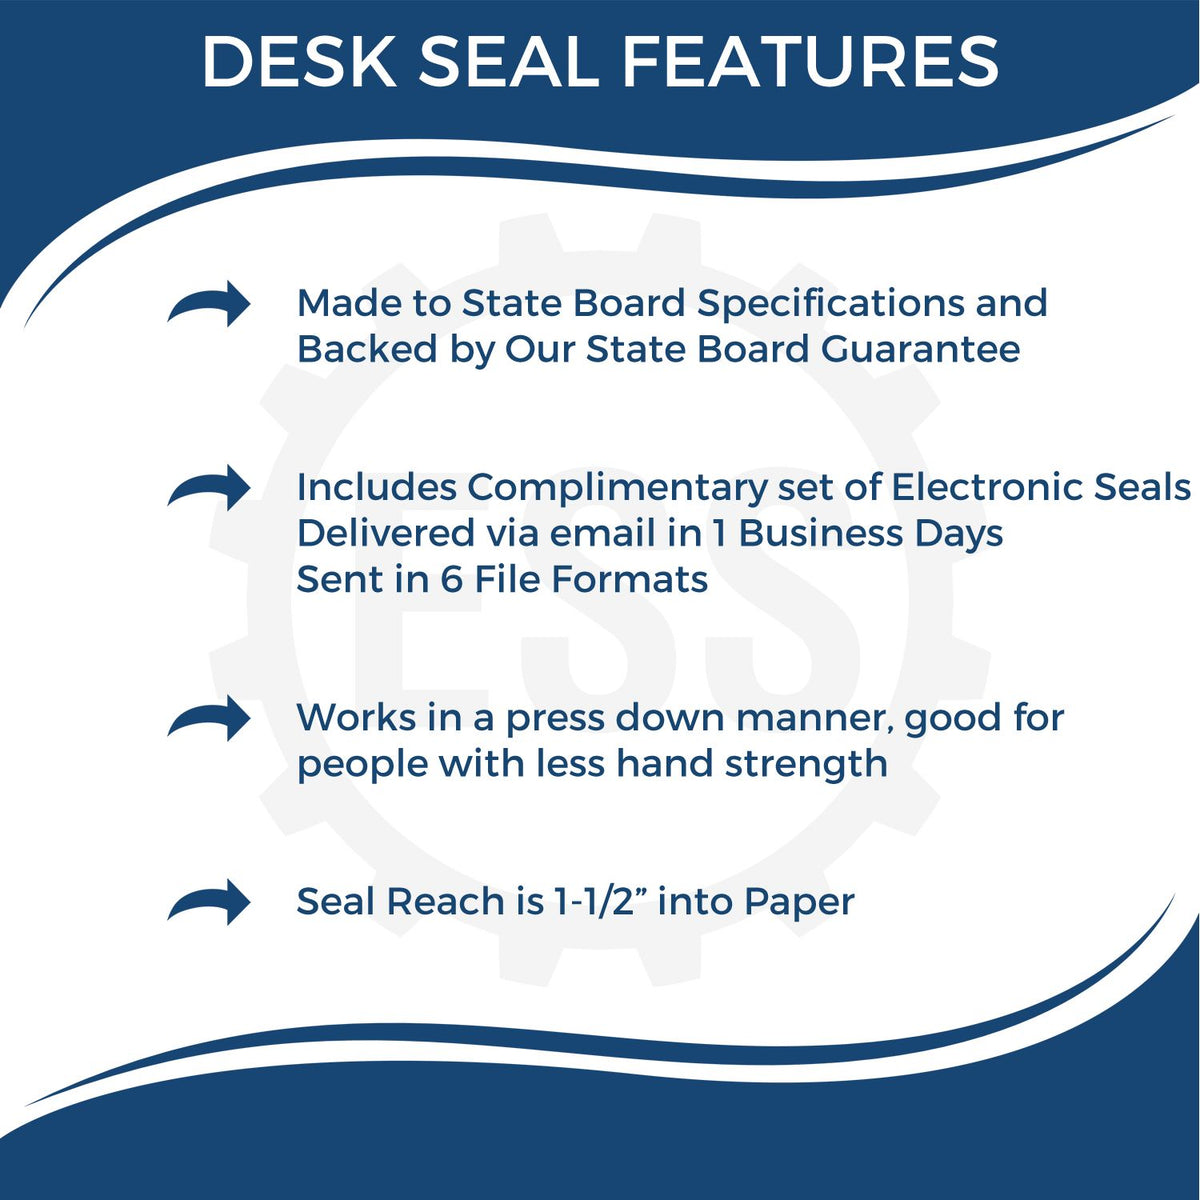 A picture of an infographic highlighting the selling points for the North Dakota Engineer Desk Seal